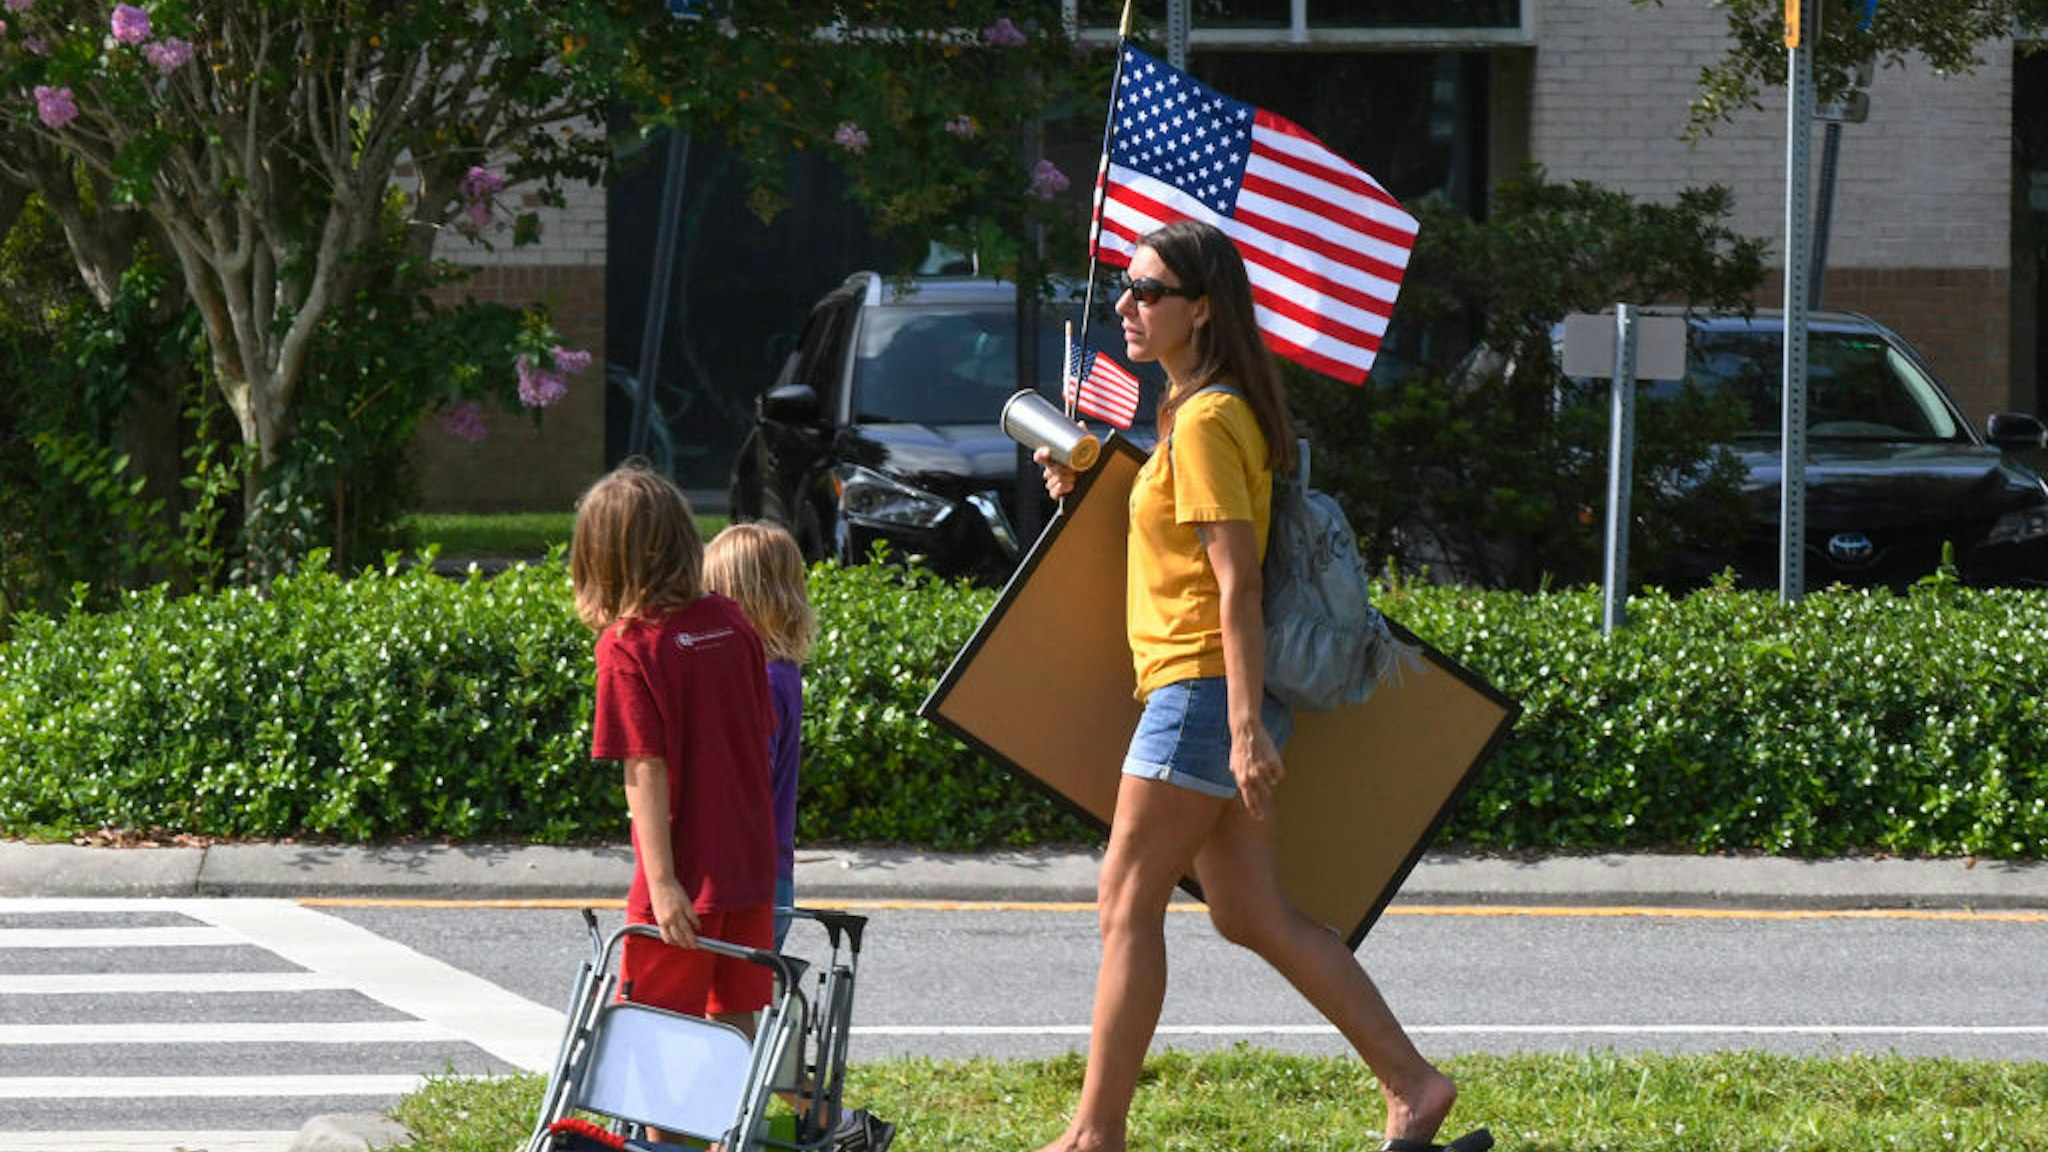 VIERA, FLORIDA, UNITED STATES - 2021/08/30: A mother holding an American flag arrives with her children to demonstrate outside an emergency meeting of the Brevard County, Florida School Board in Viera to discuss whether face masks in local schools should be mandatory. An executive order signed by Florida Governor Ron DeSantis banning mask mandates in schools was thrown out by a Florida judge on Friday. (Photo by Paul Hennessy/SOPA Images/LightRocket via Getty Images)